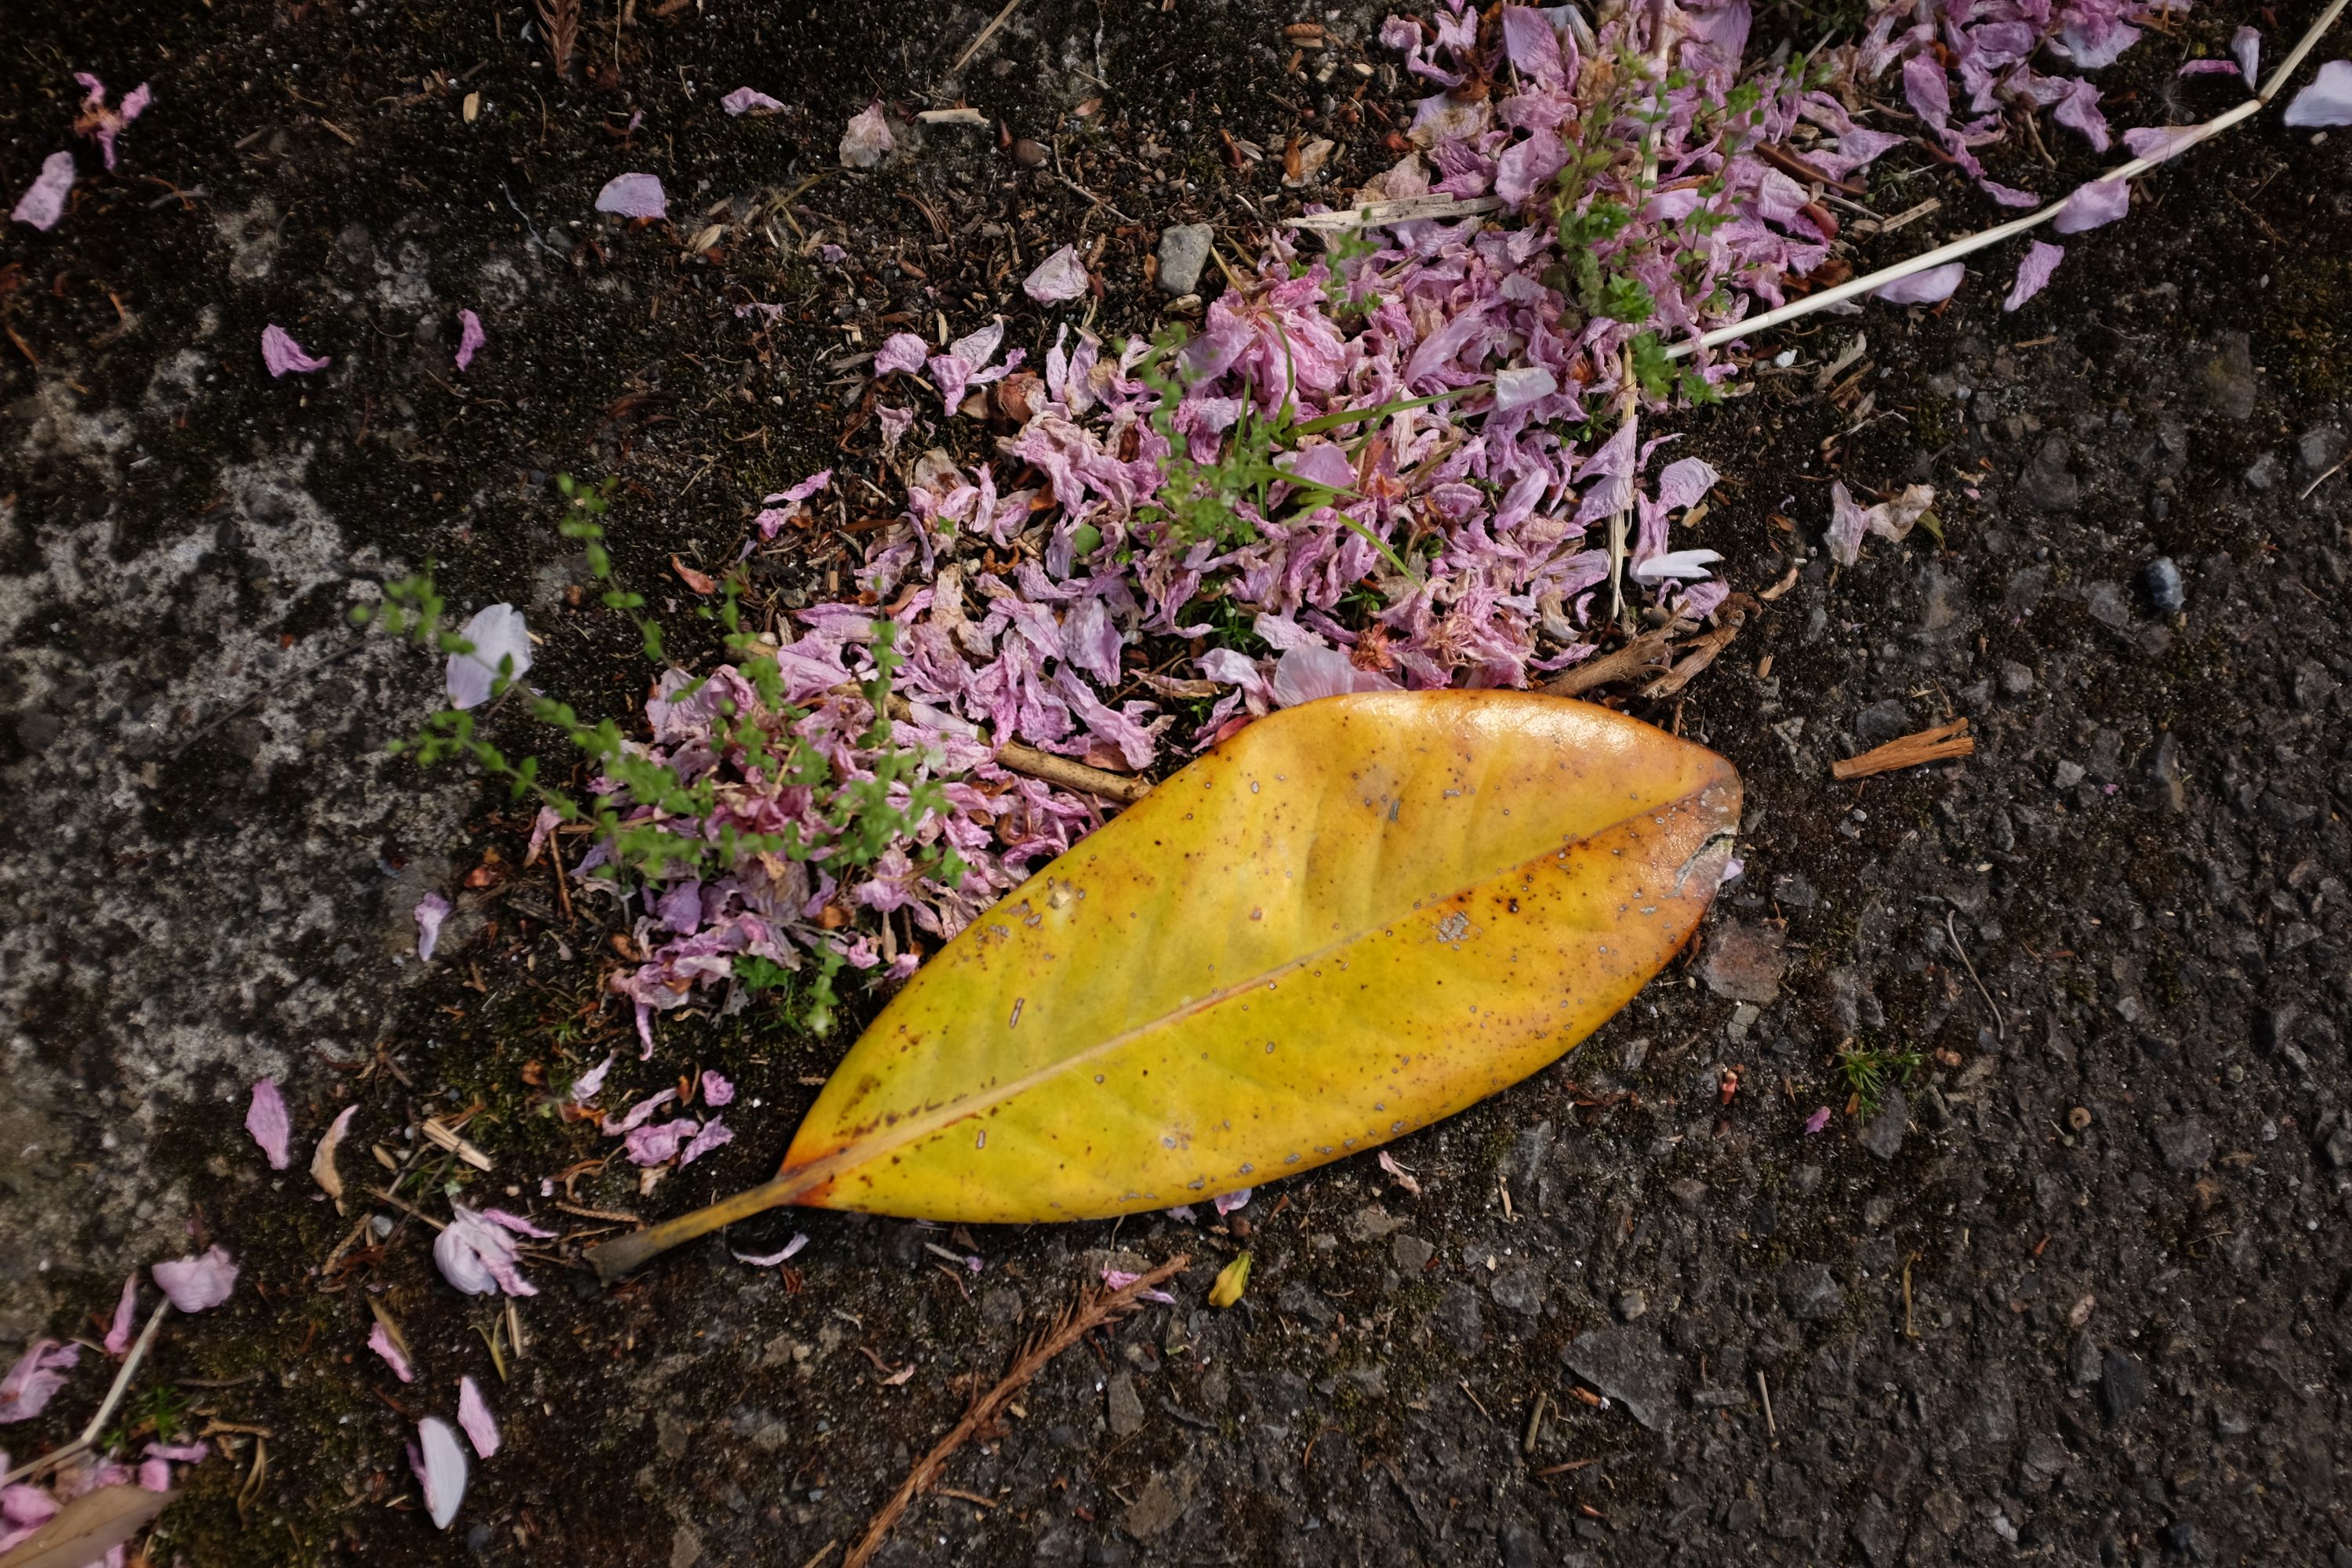 A very yellow leaf and pink petals on the ground.